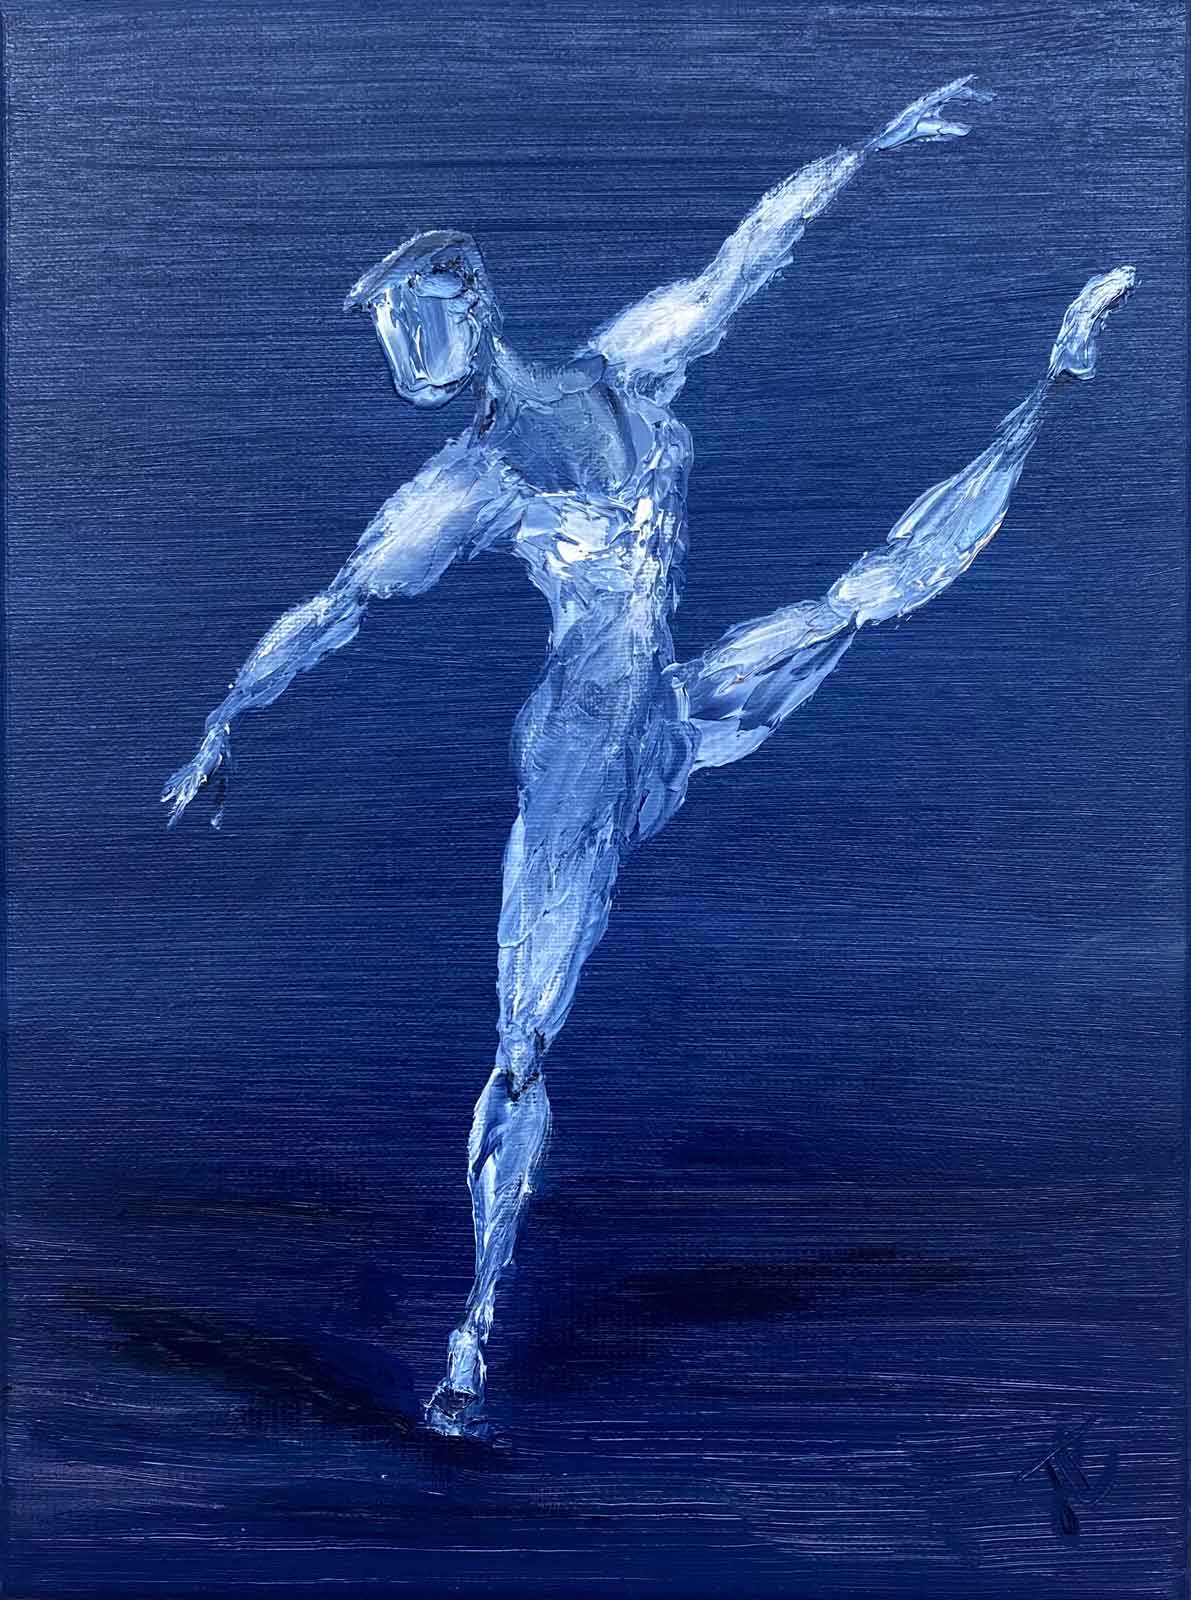 Stylised painting in blue and white of danseur figure poised with arms and left leg extended